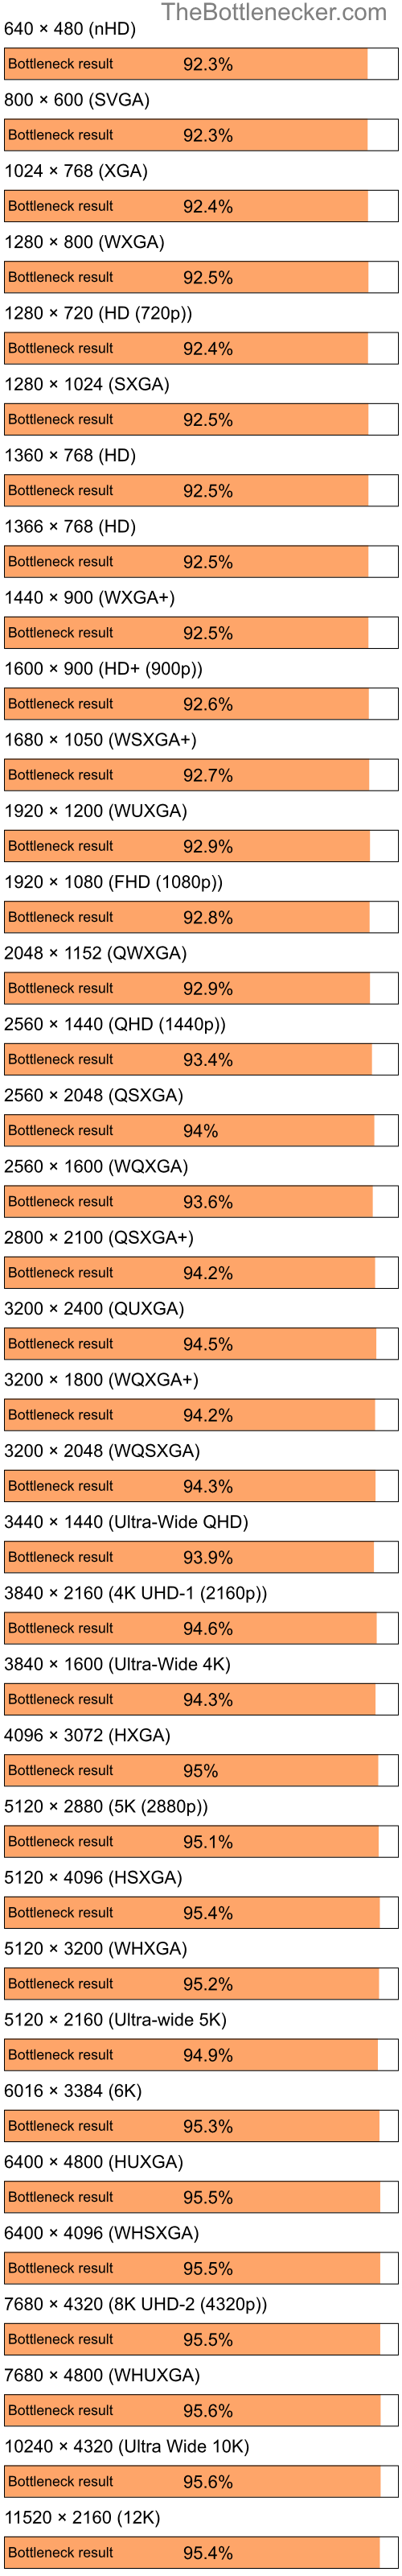 Bottleneck results by resolution for Intel Celeron M 420 and NVIDIA MX 400 in Graphic Card Intense Tasks